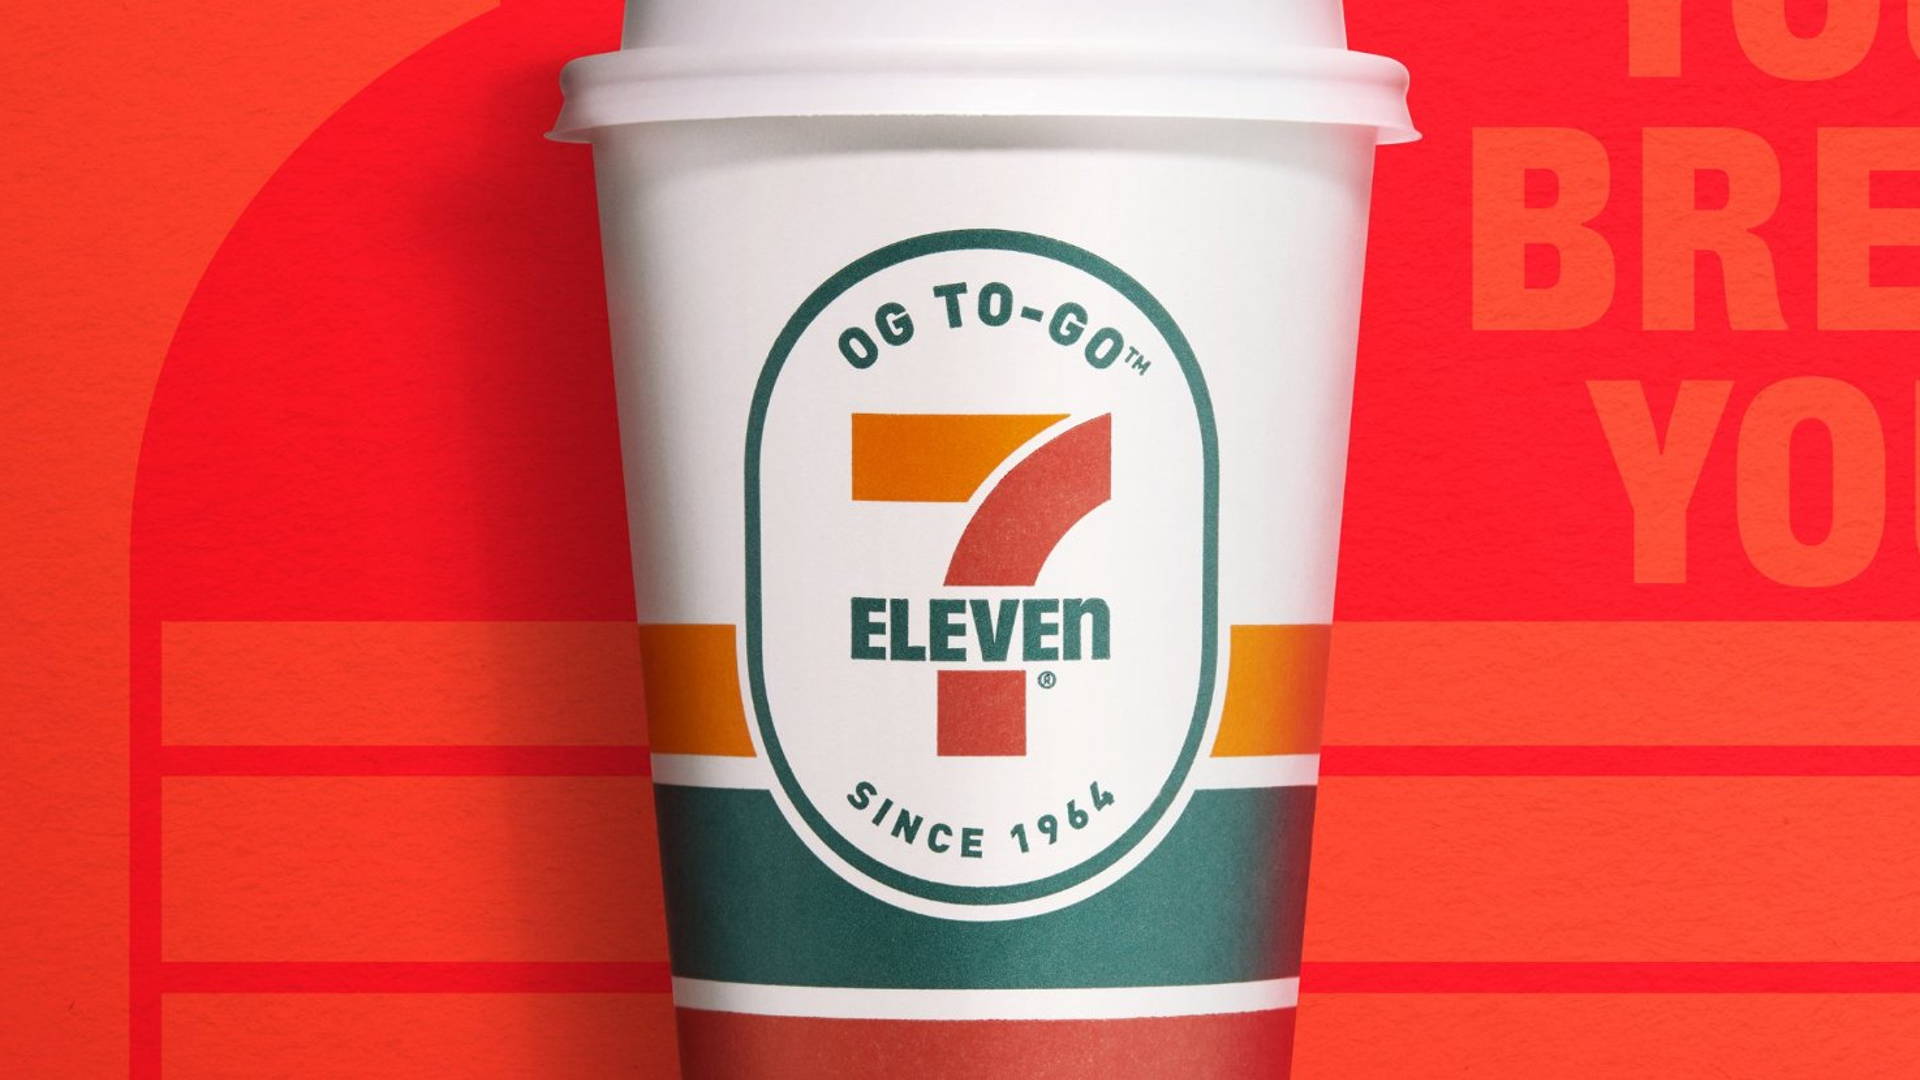 Featured image for Safari Sunday Puts 7-Eleven's Coffee Cred Centerstage With Brand Update